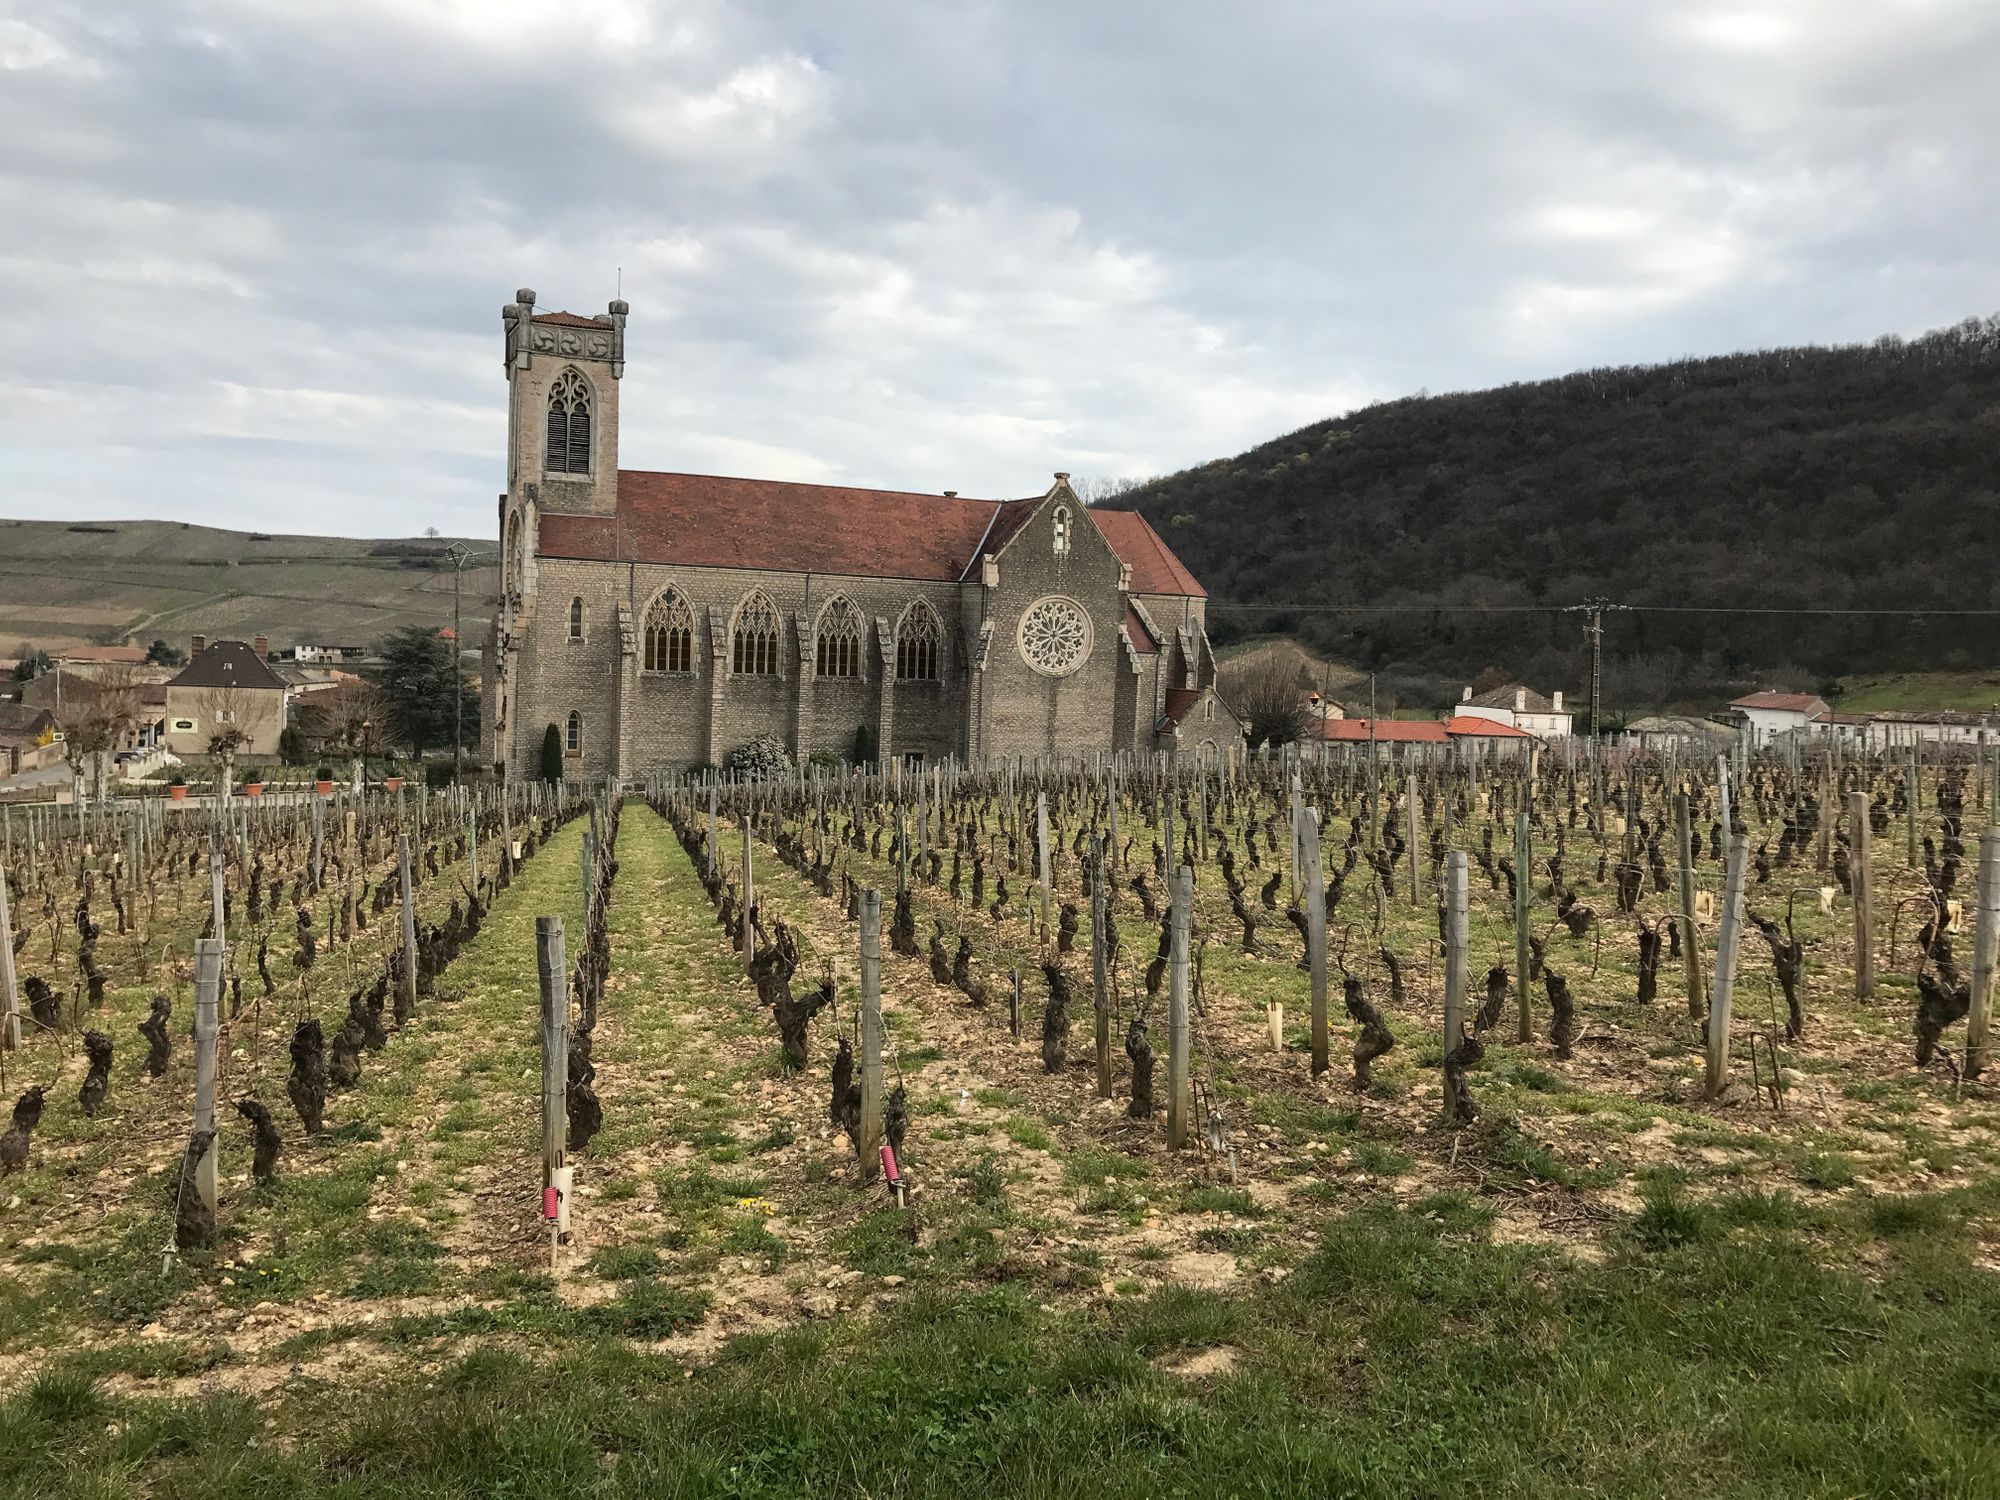 Travel - Judging at Concours de Lyon and driving aimlessly around Beaujolais and the Maconais